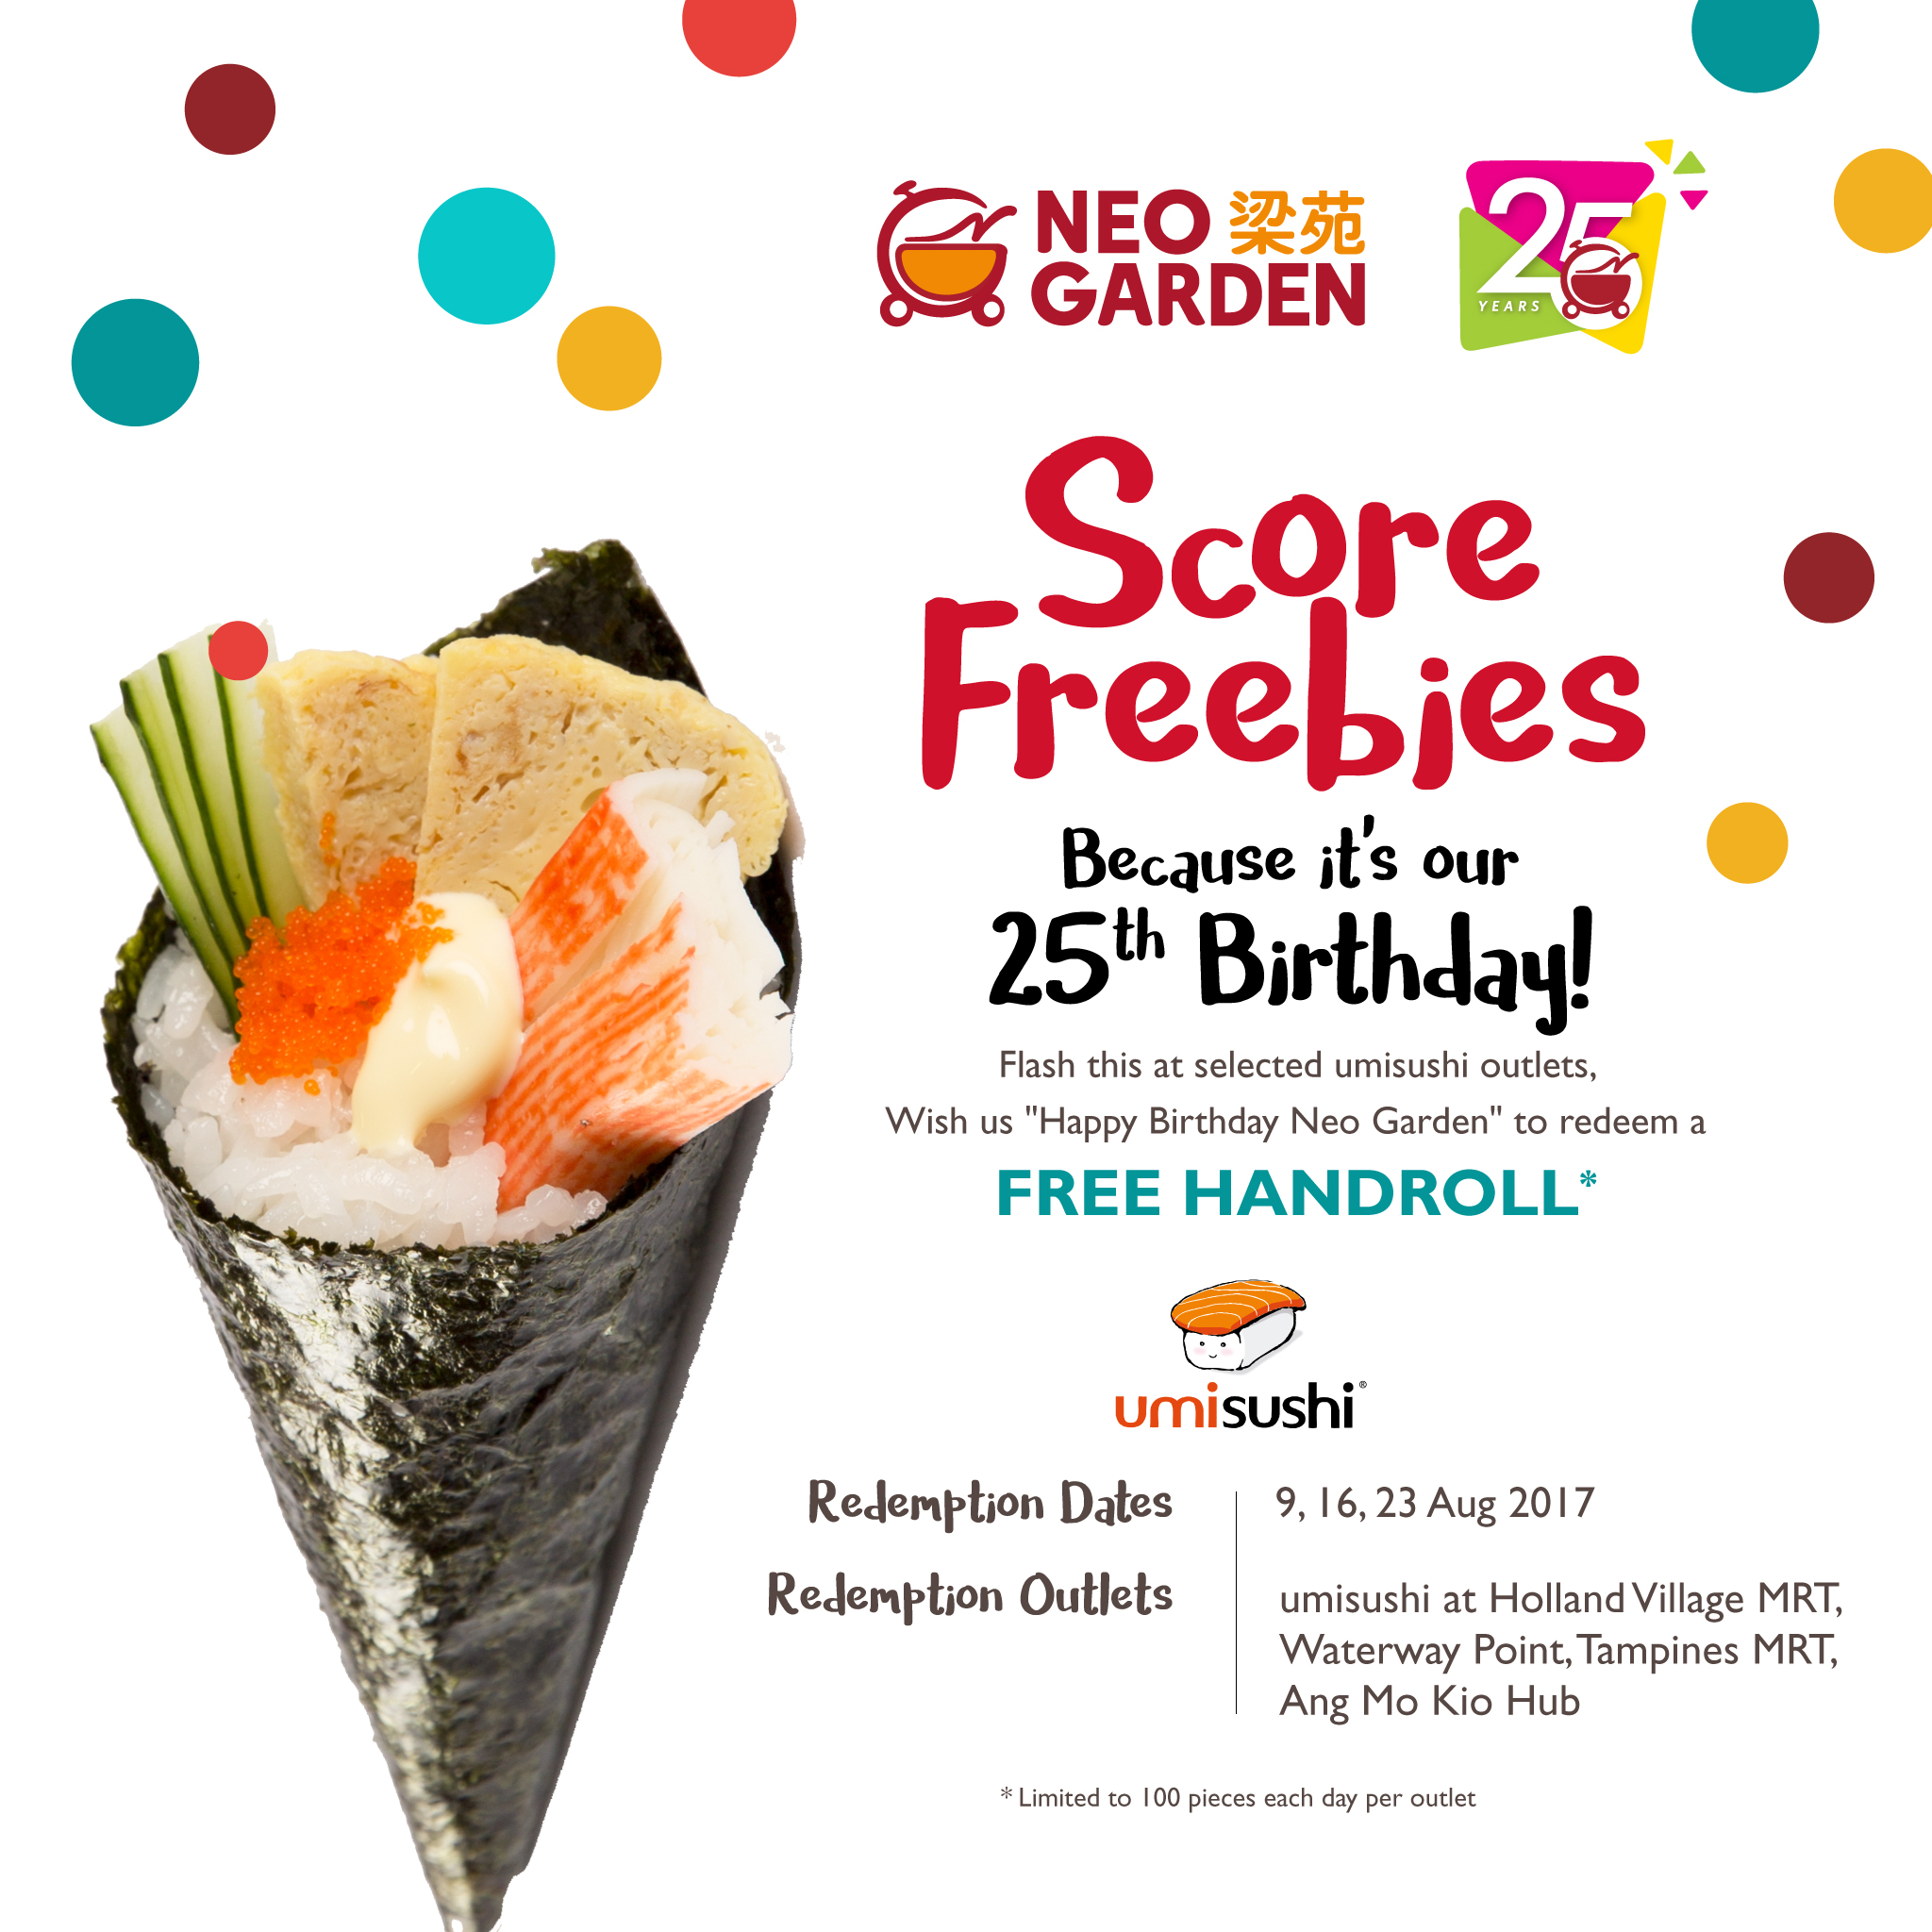 Neo Garden's 25th Anniversary: FREE 100 pieces of California Handrolls at 4 umisushi outlets